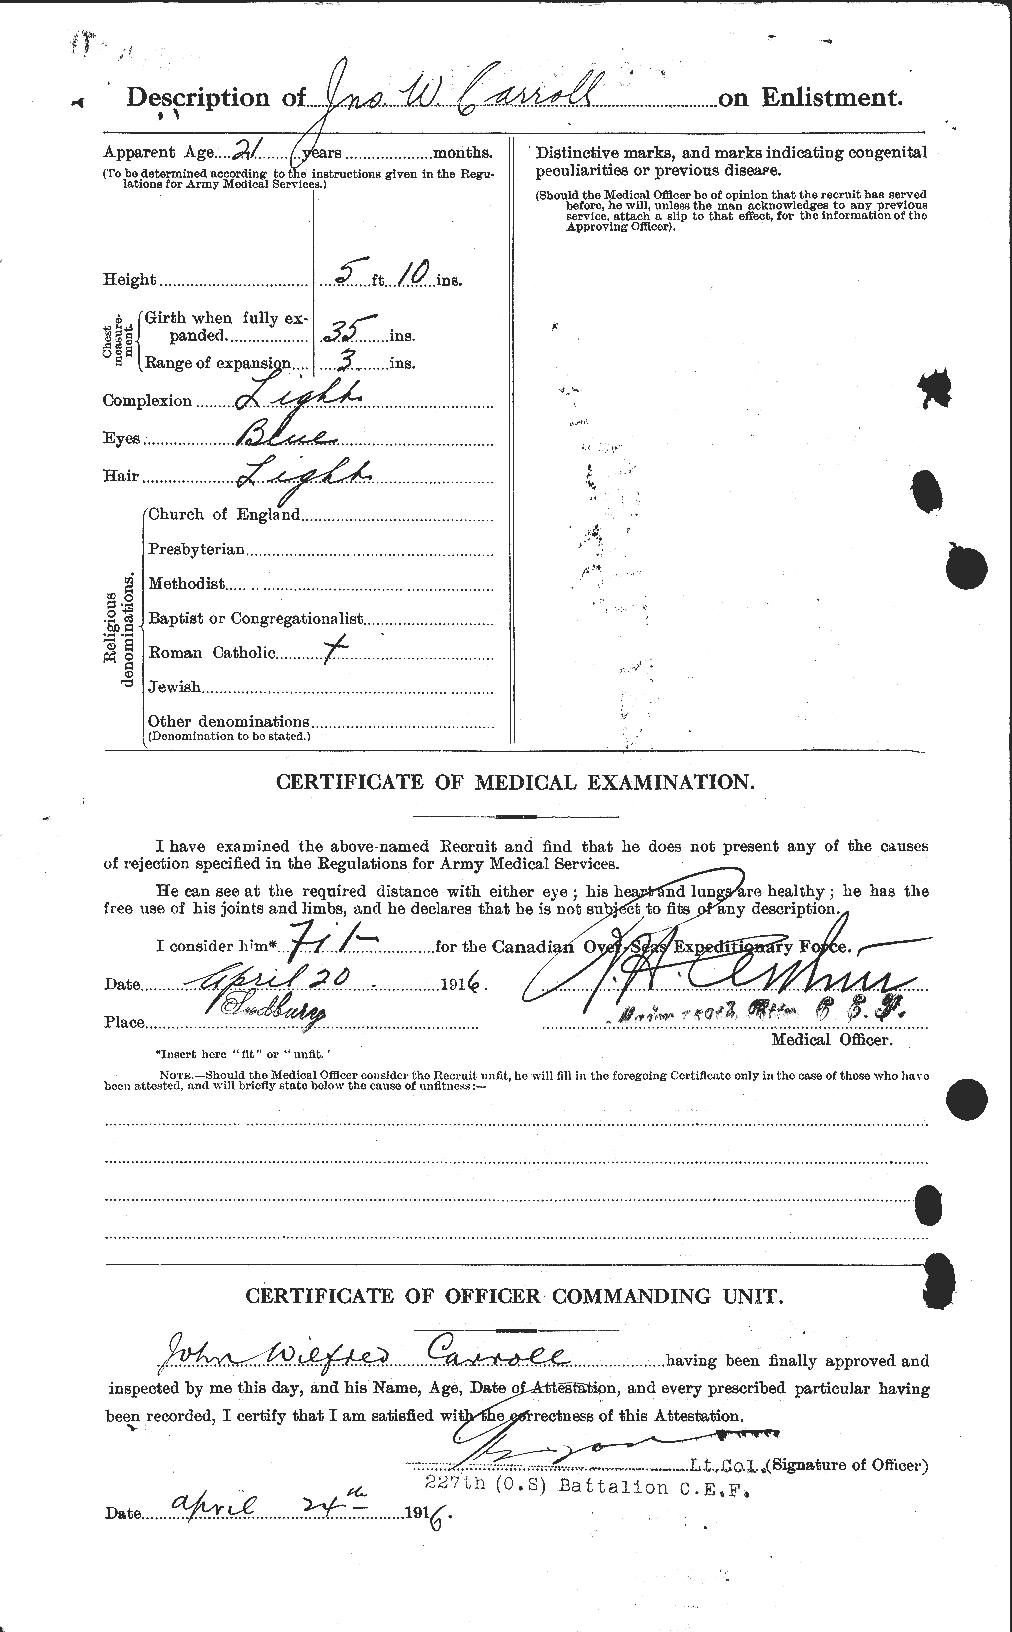 Personnel Records of the First World War - CEF 005635b